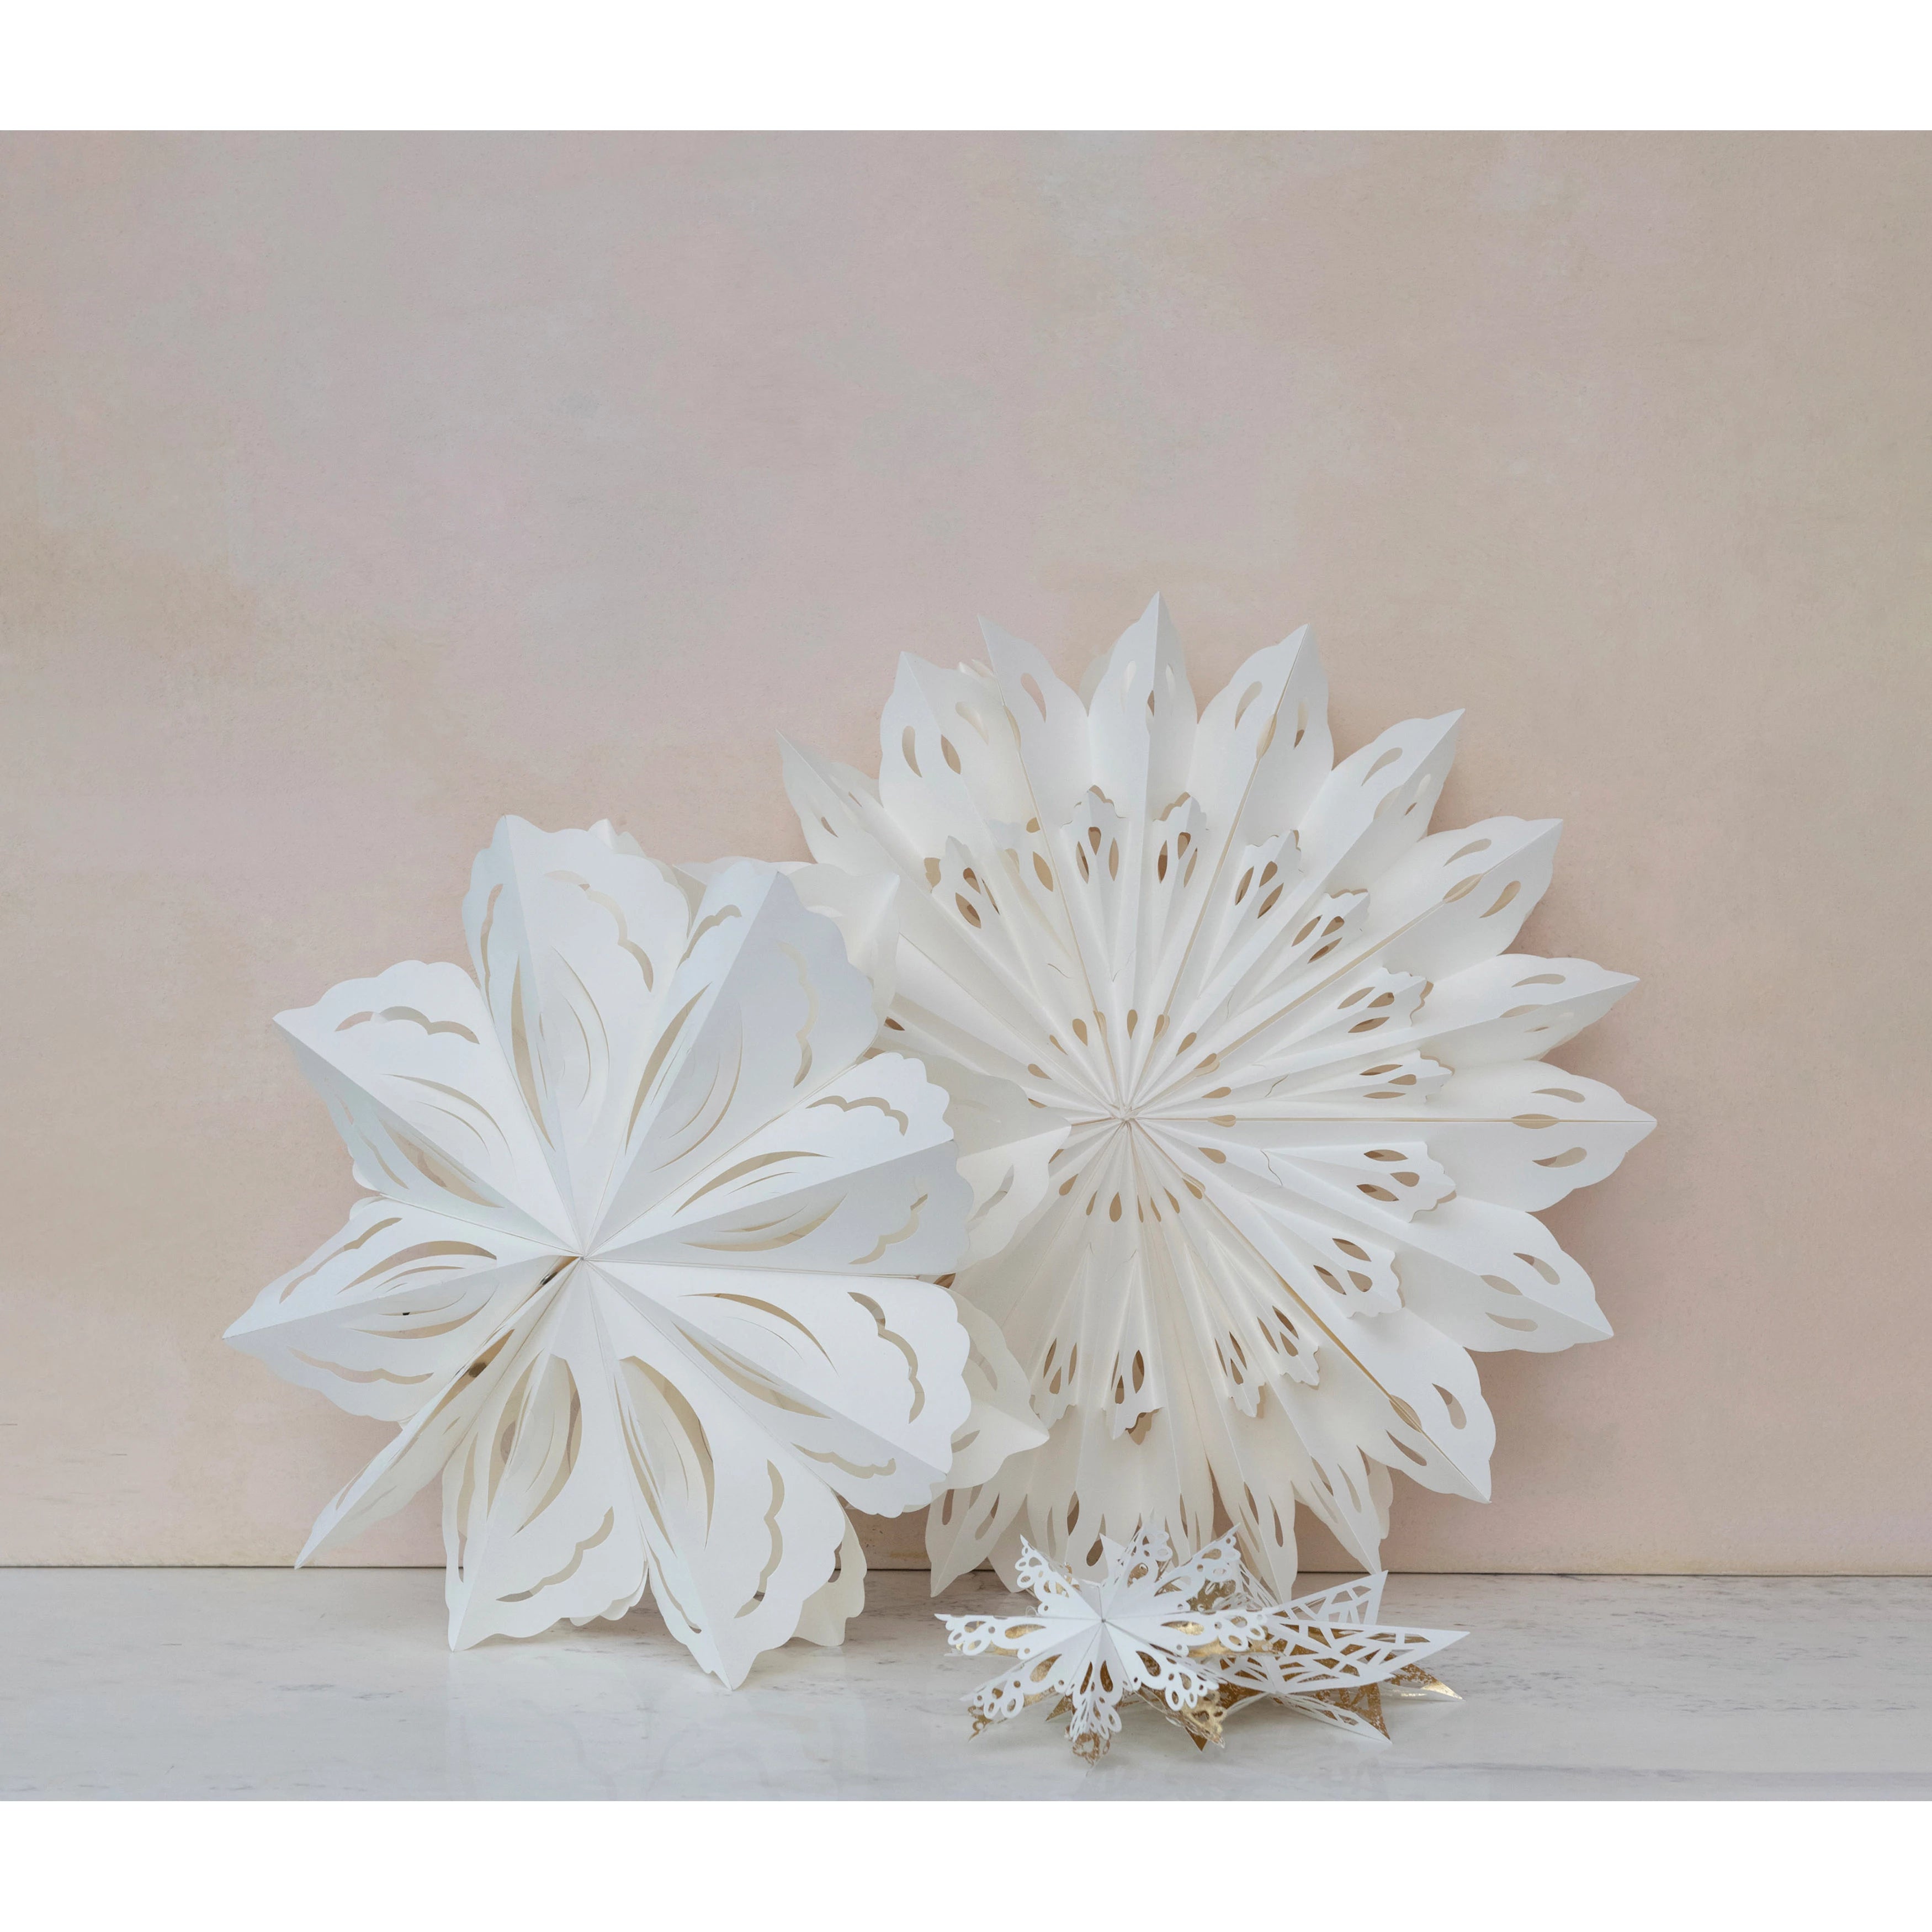 Hanging Paper Snowflake - Small